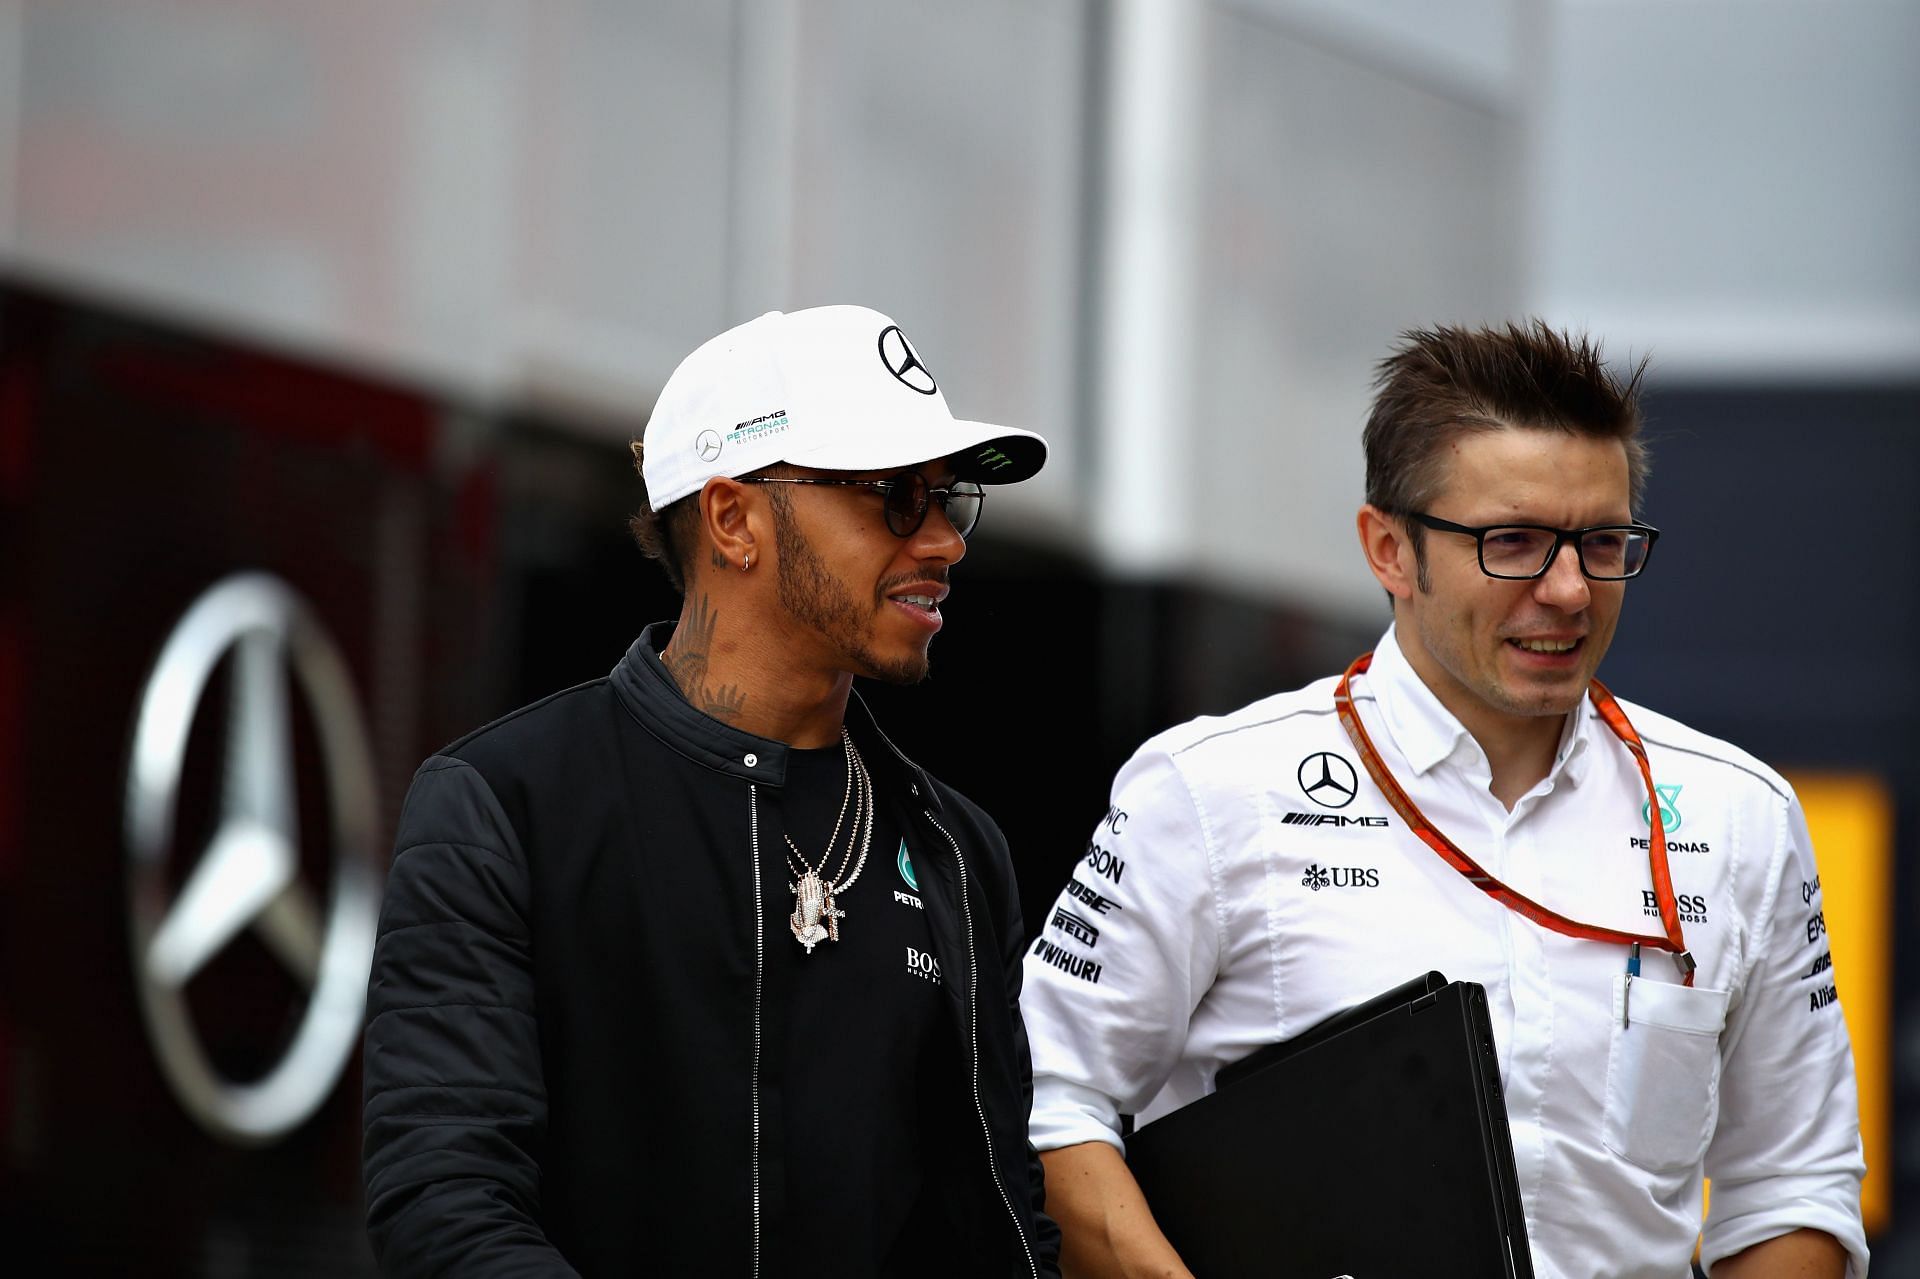 F1 Grand Prix of Great Britain - Previews - Lewis Hamilton with his race engineer Peter Bonnington in the paddocks (Photo by Clive Mason/Getty Images)